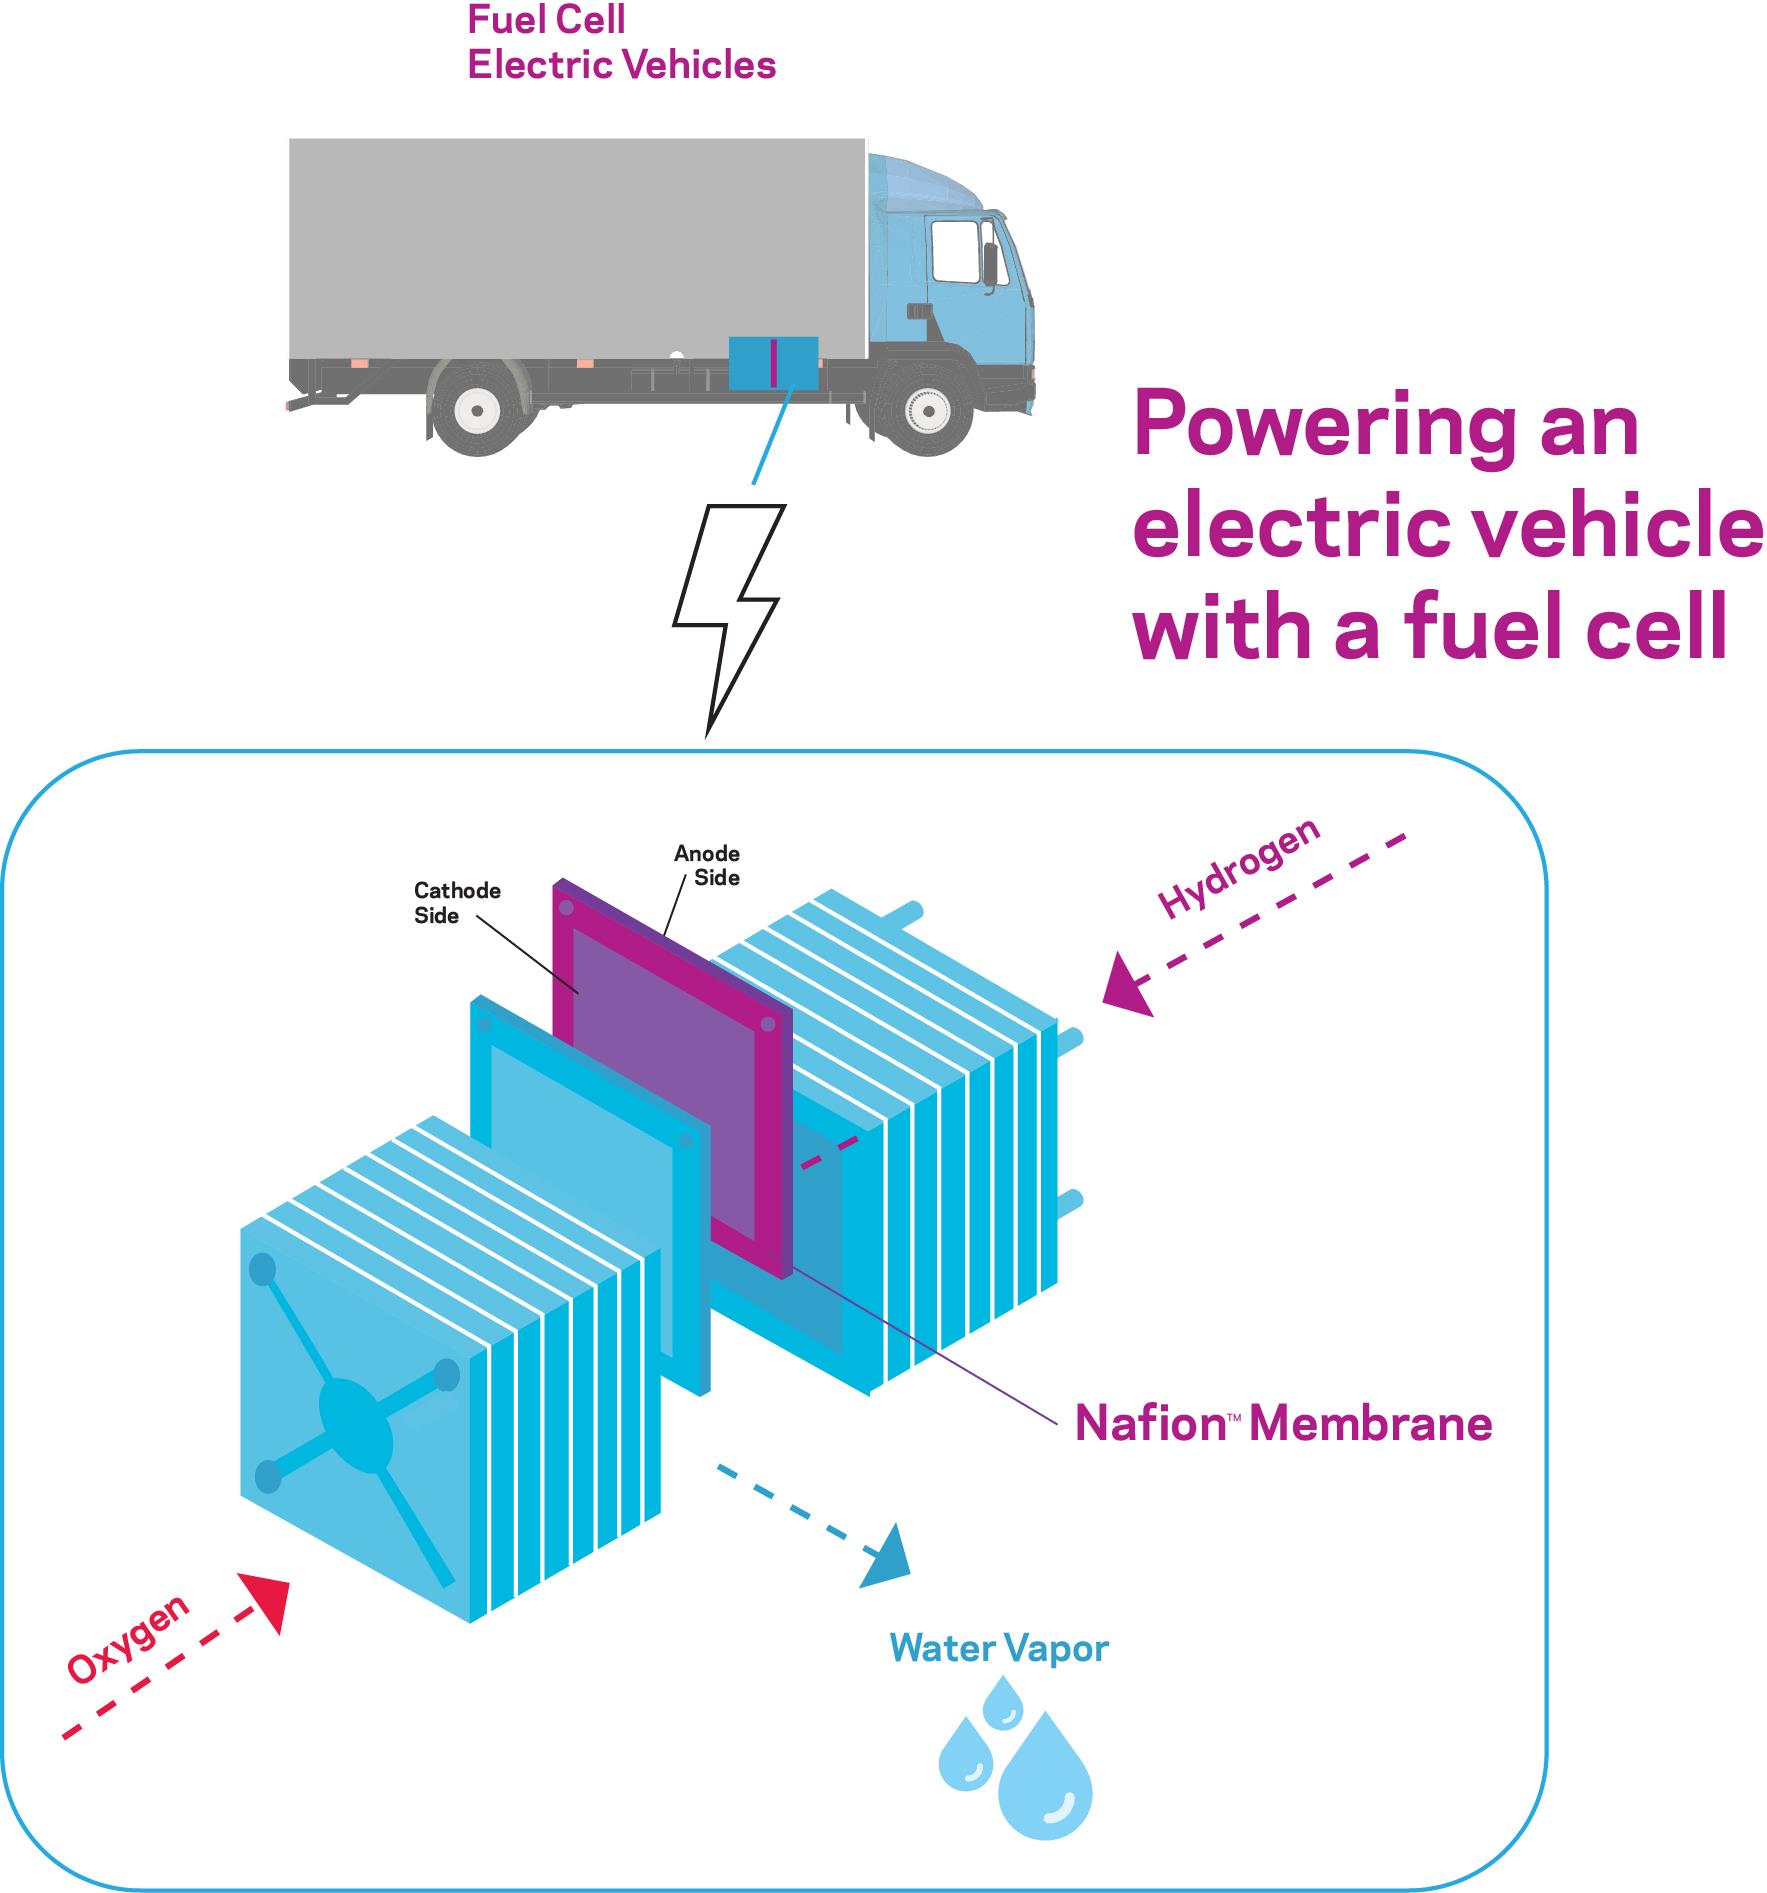 Powering an electric vehicle with a fuel cell